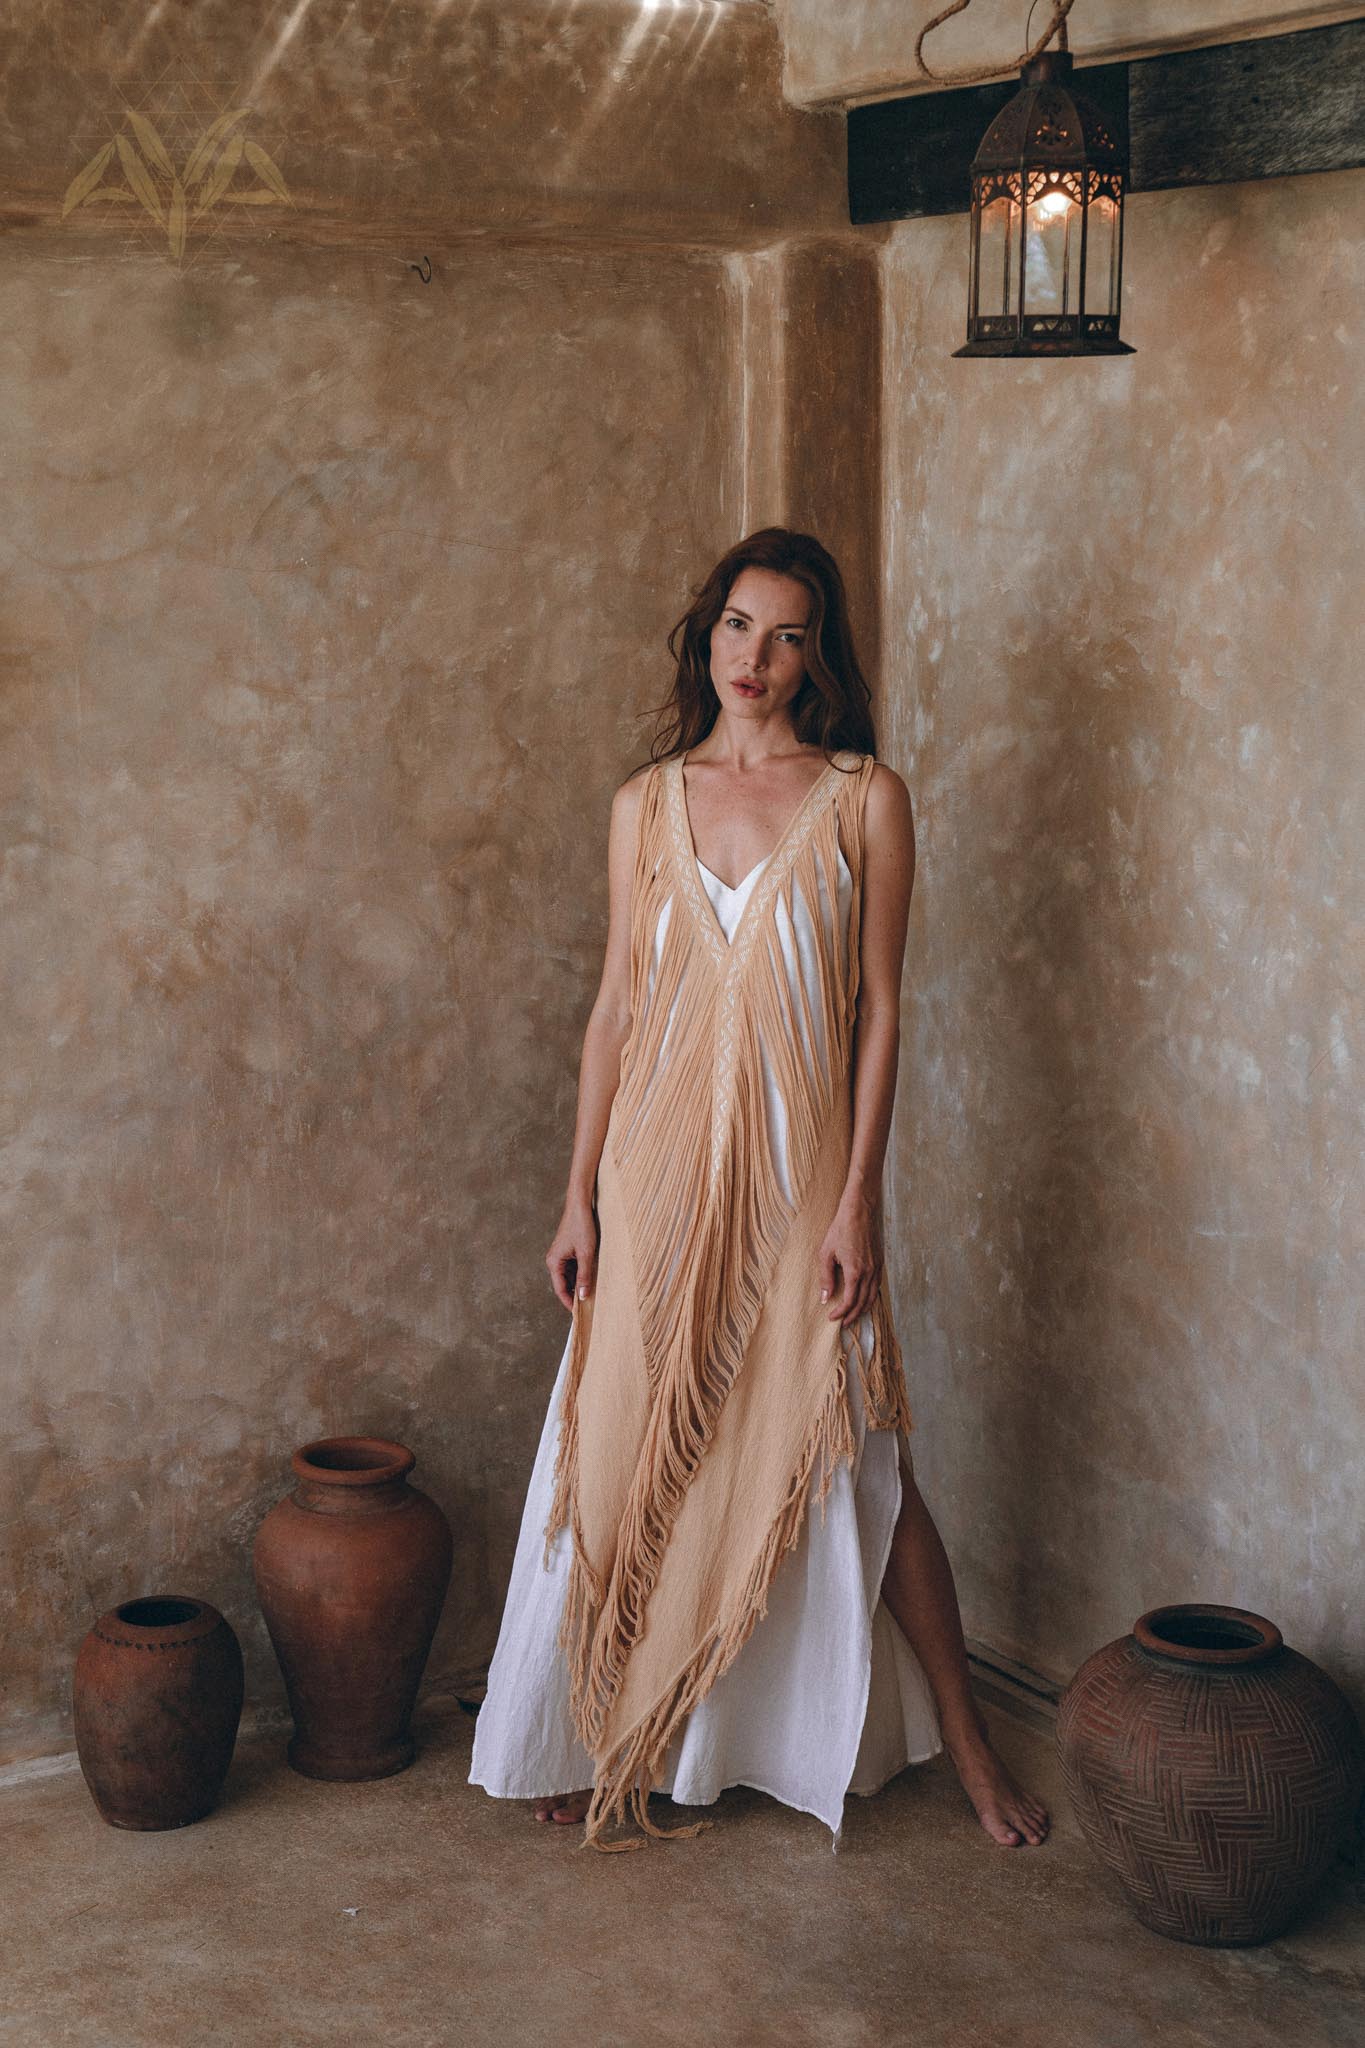 Boho beige ochre dress hand-woven and hand-loomed with intricate embroidery and tassel border.